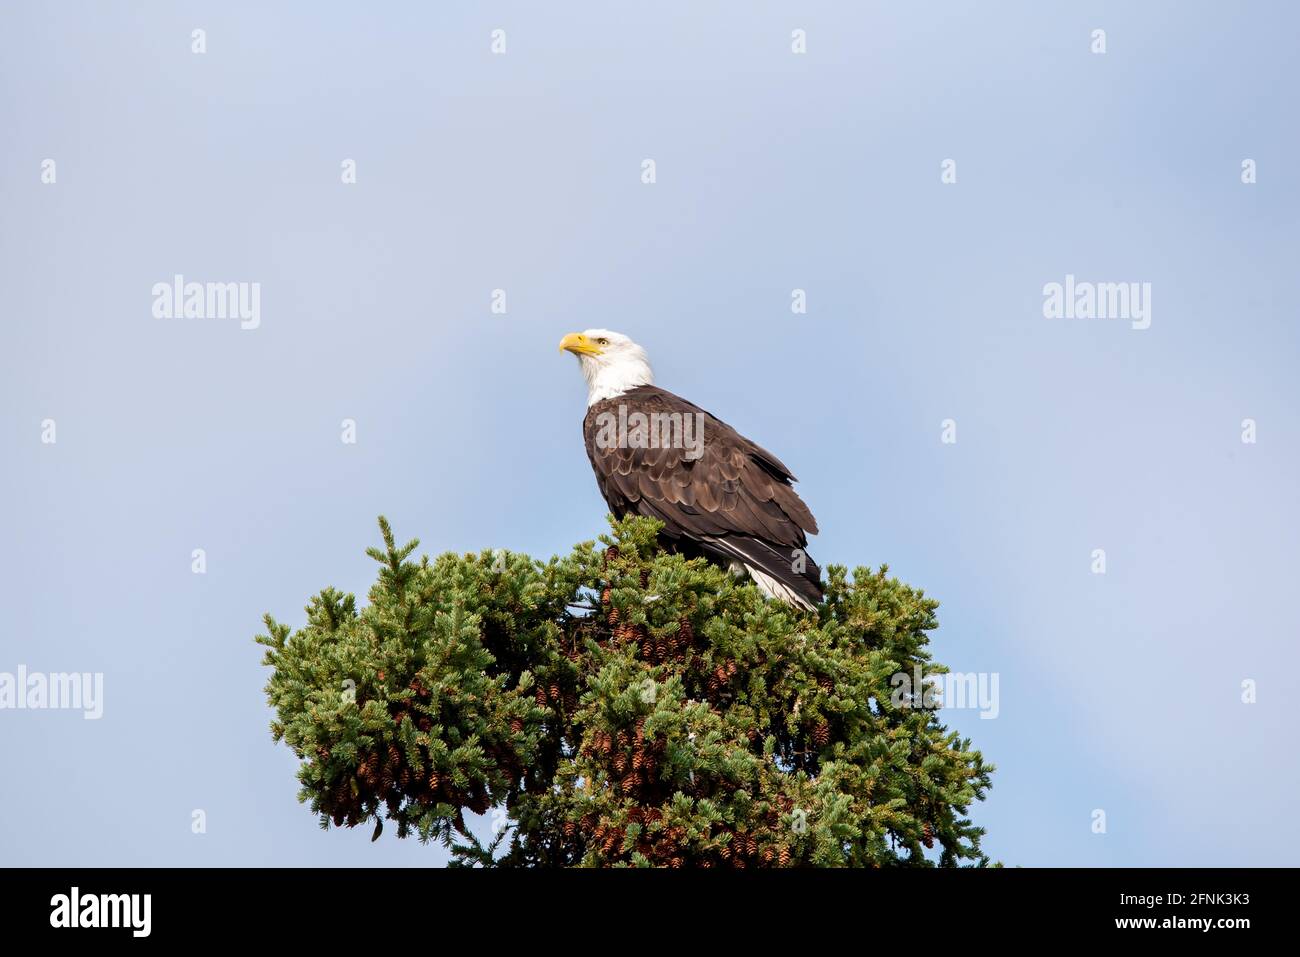 A single adult bald eagle sitting on top of a spruce tree top in northern Canada during summertime. Beautiful, regal, wild bird in wilderness. Stock Photo